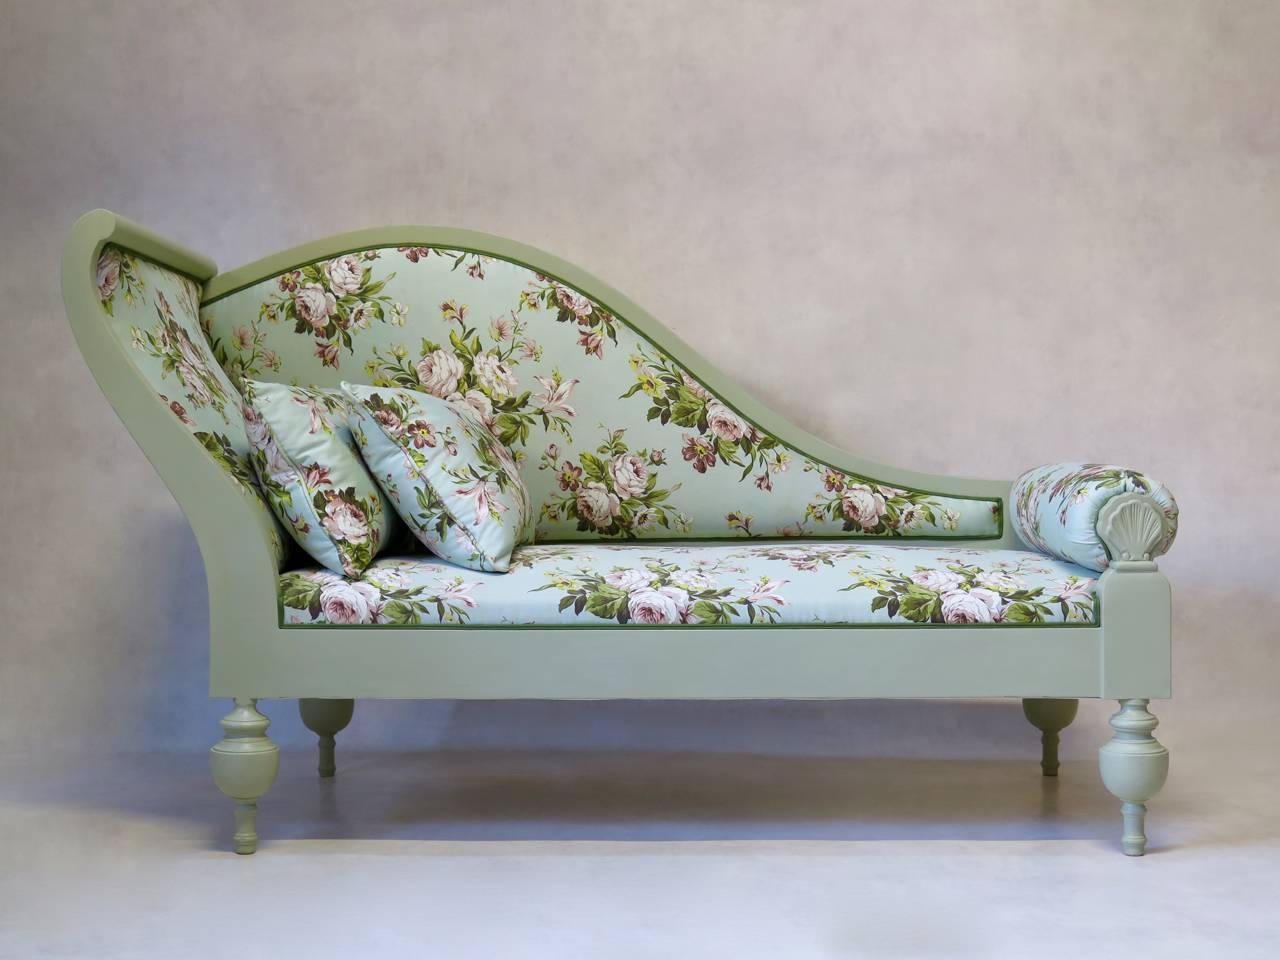 Rather theatrical and glamorous daybed with a sweeping S-shaped top, raised on large turned baluster legs. The structure is painted in an elegant light green, and has been newly upholstered in vintage chintz.